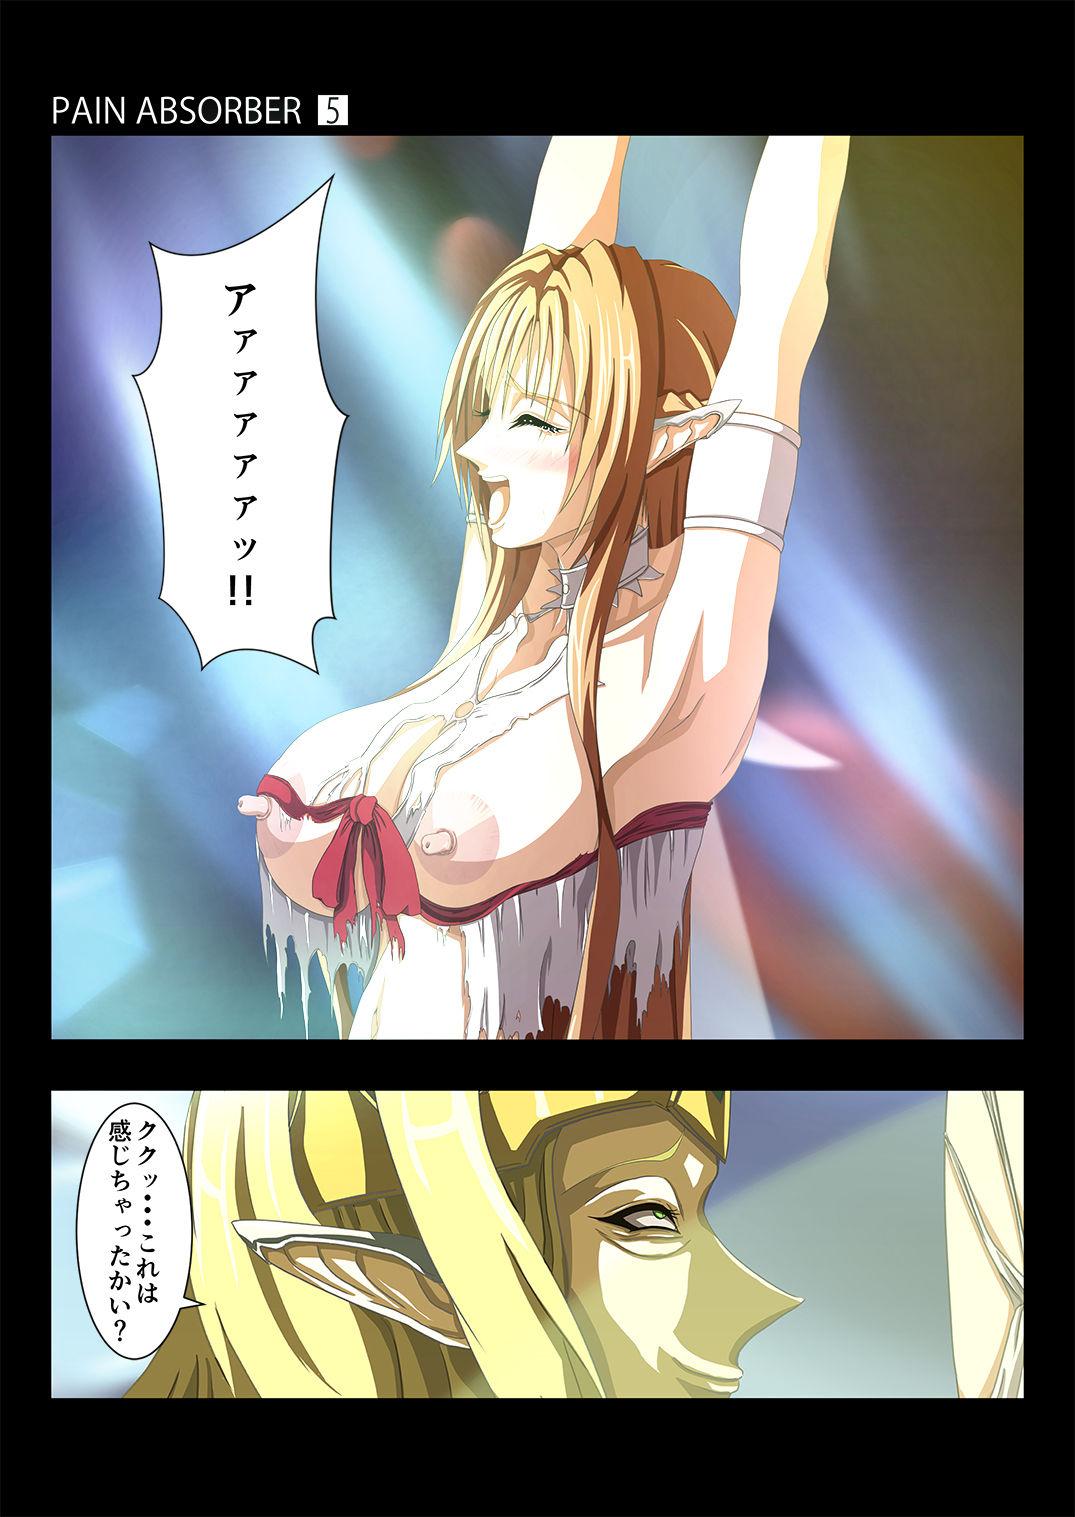 Cameltoe PAIN ABSORBER 5 - Sword art online Gay Ass Fucking - Page 6